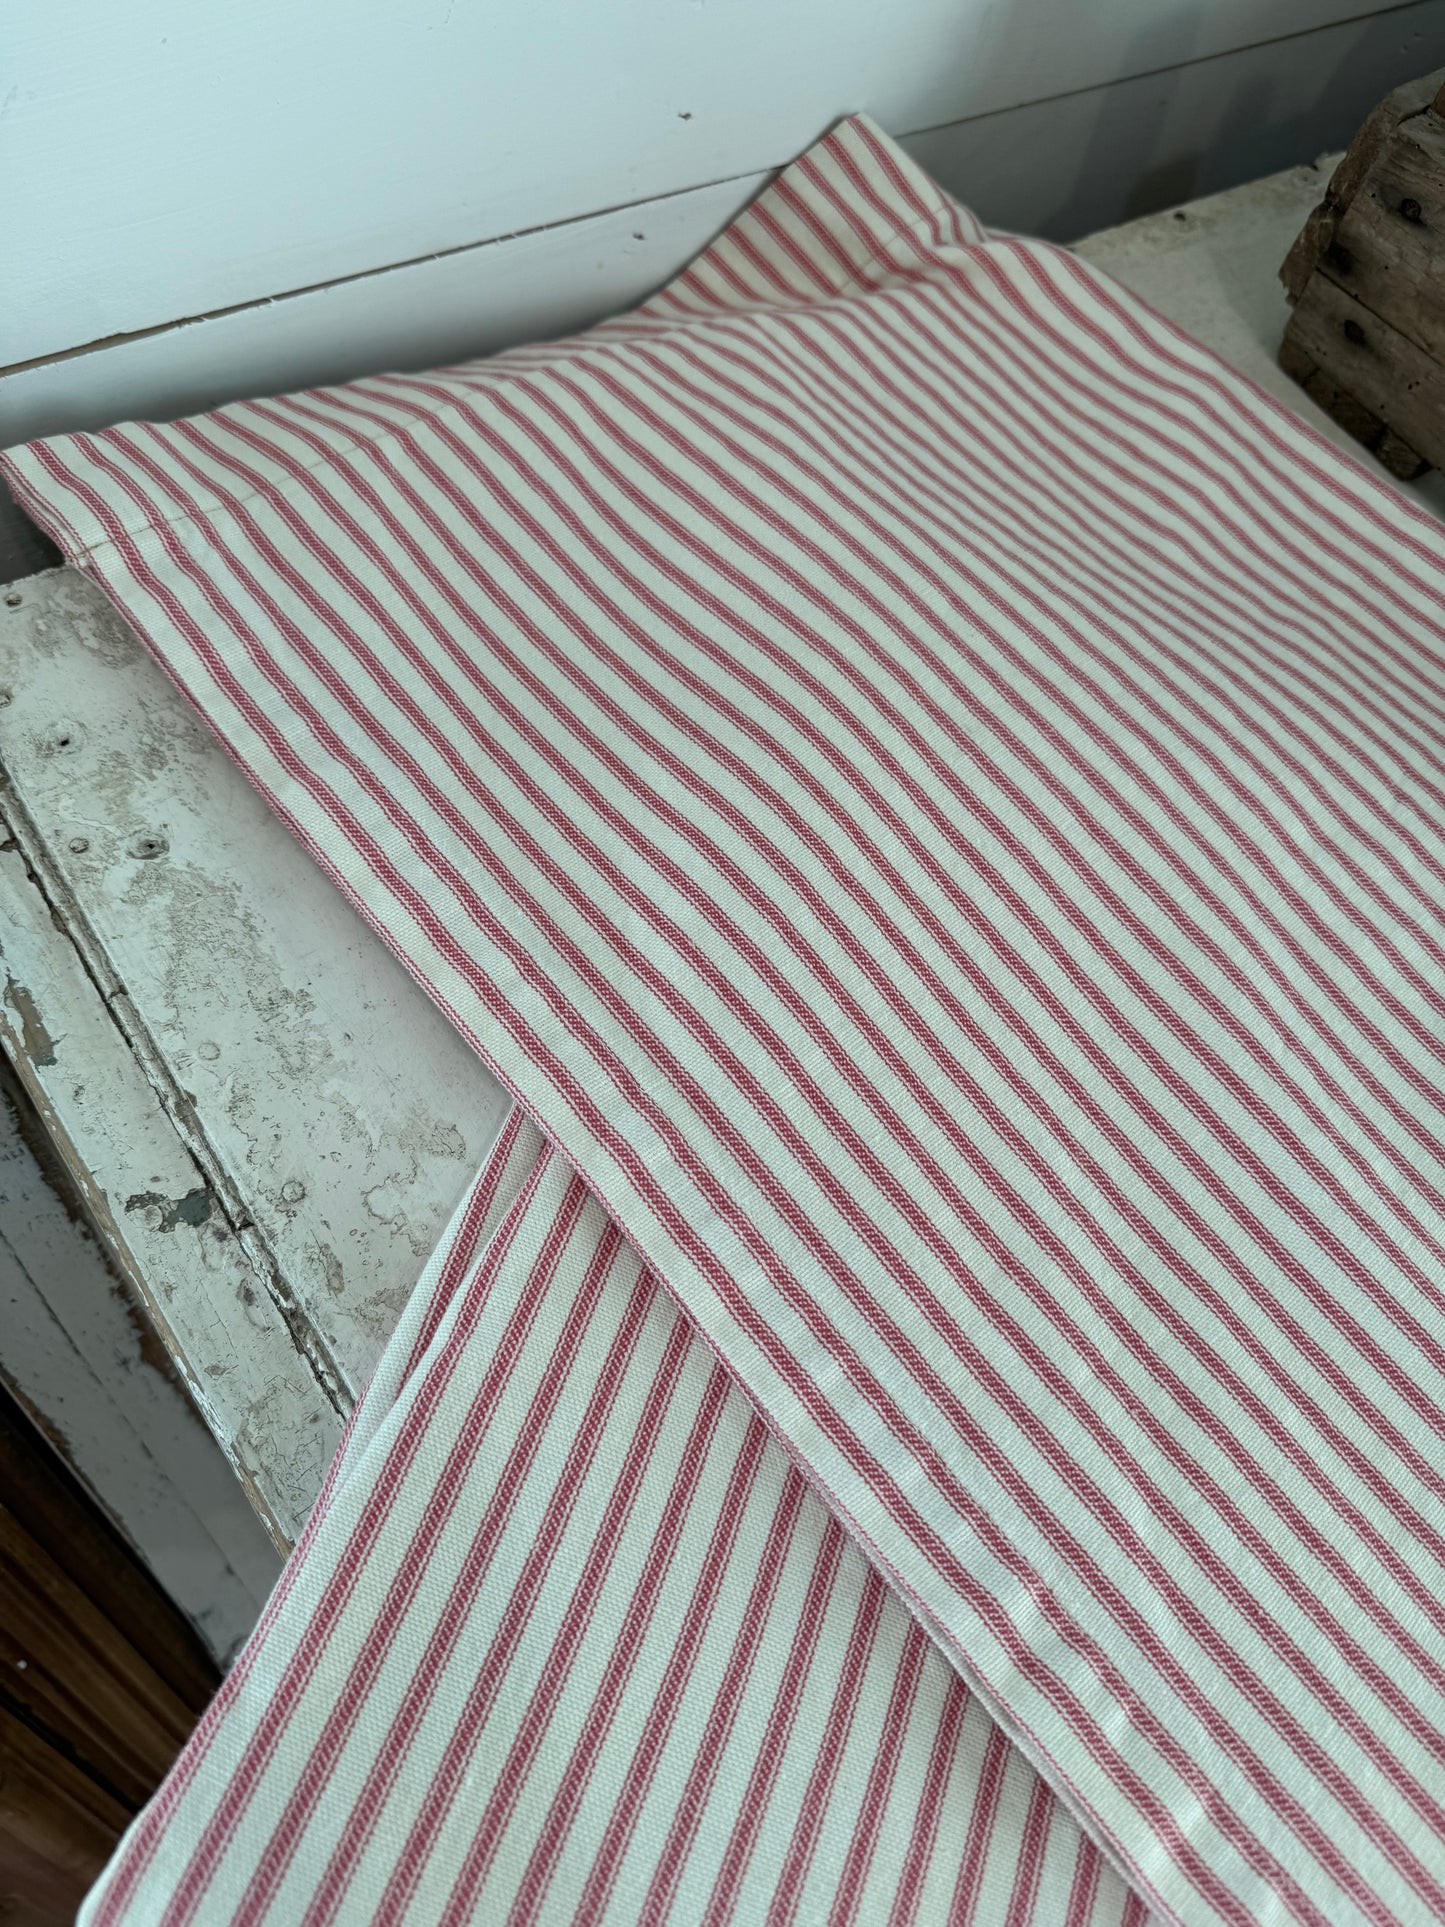 Set of Red Ticking Stripe Curtains 56 L x 56 W had small red stain